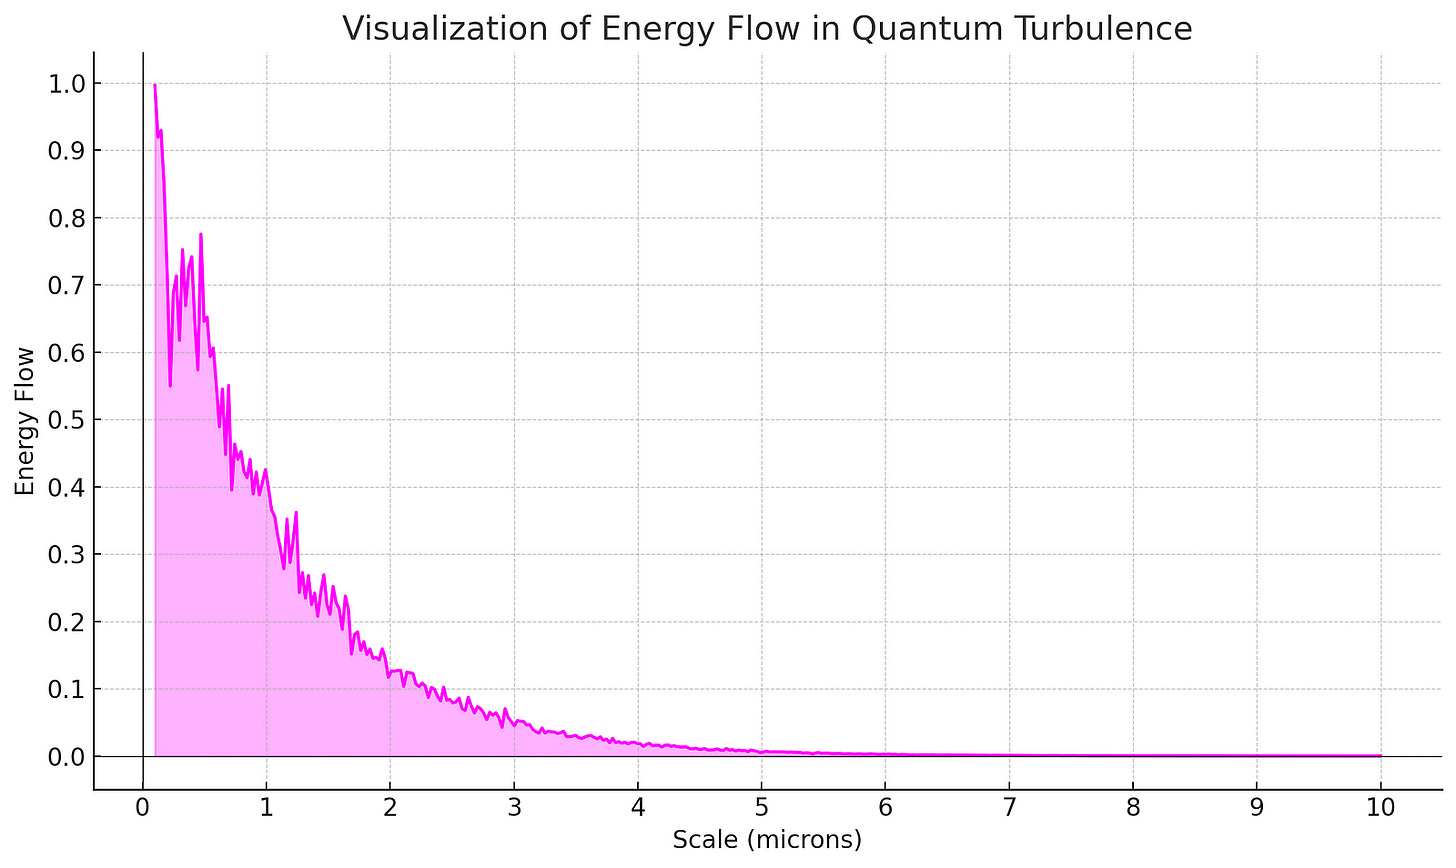 Line graph showing the energy flow in quantum turbulence over various scales, with the energy flow decreasing exponentially as scale increases, highlighted in magenta.